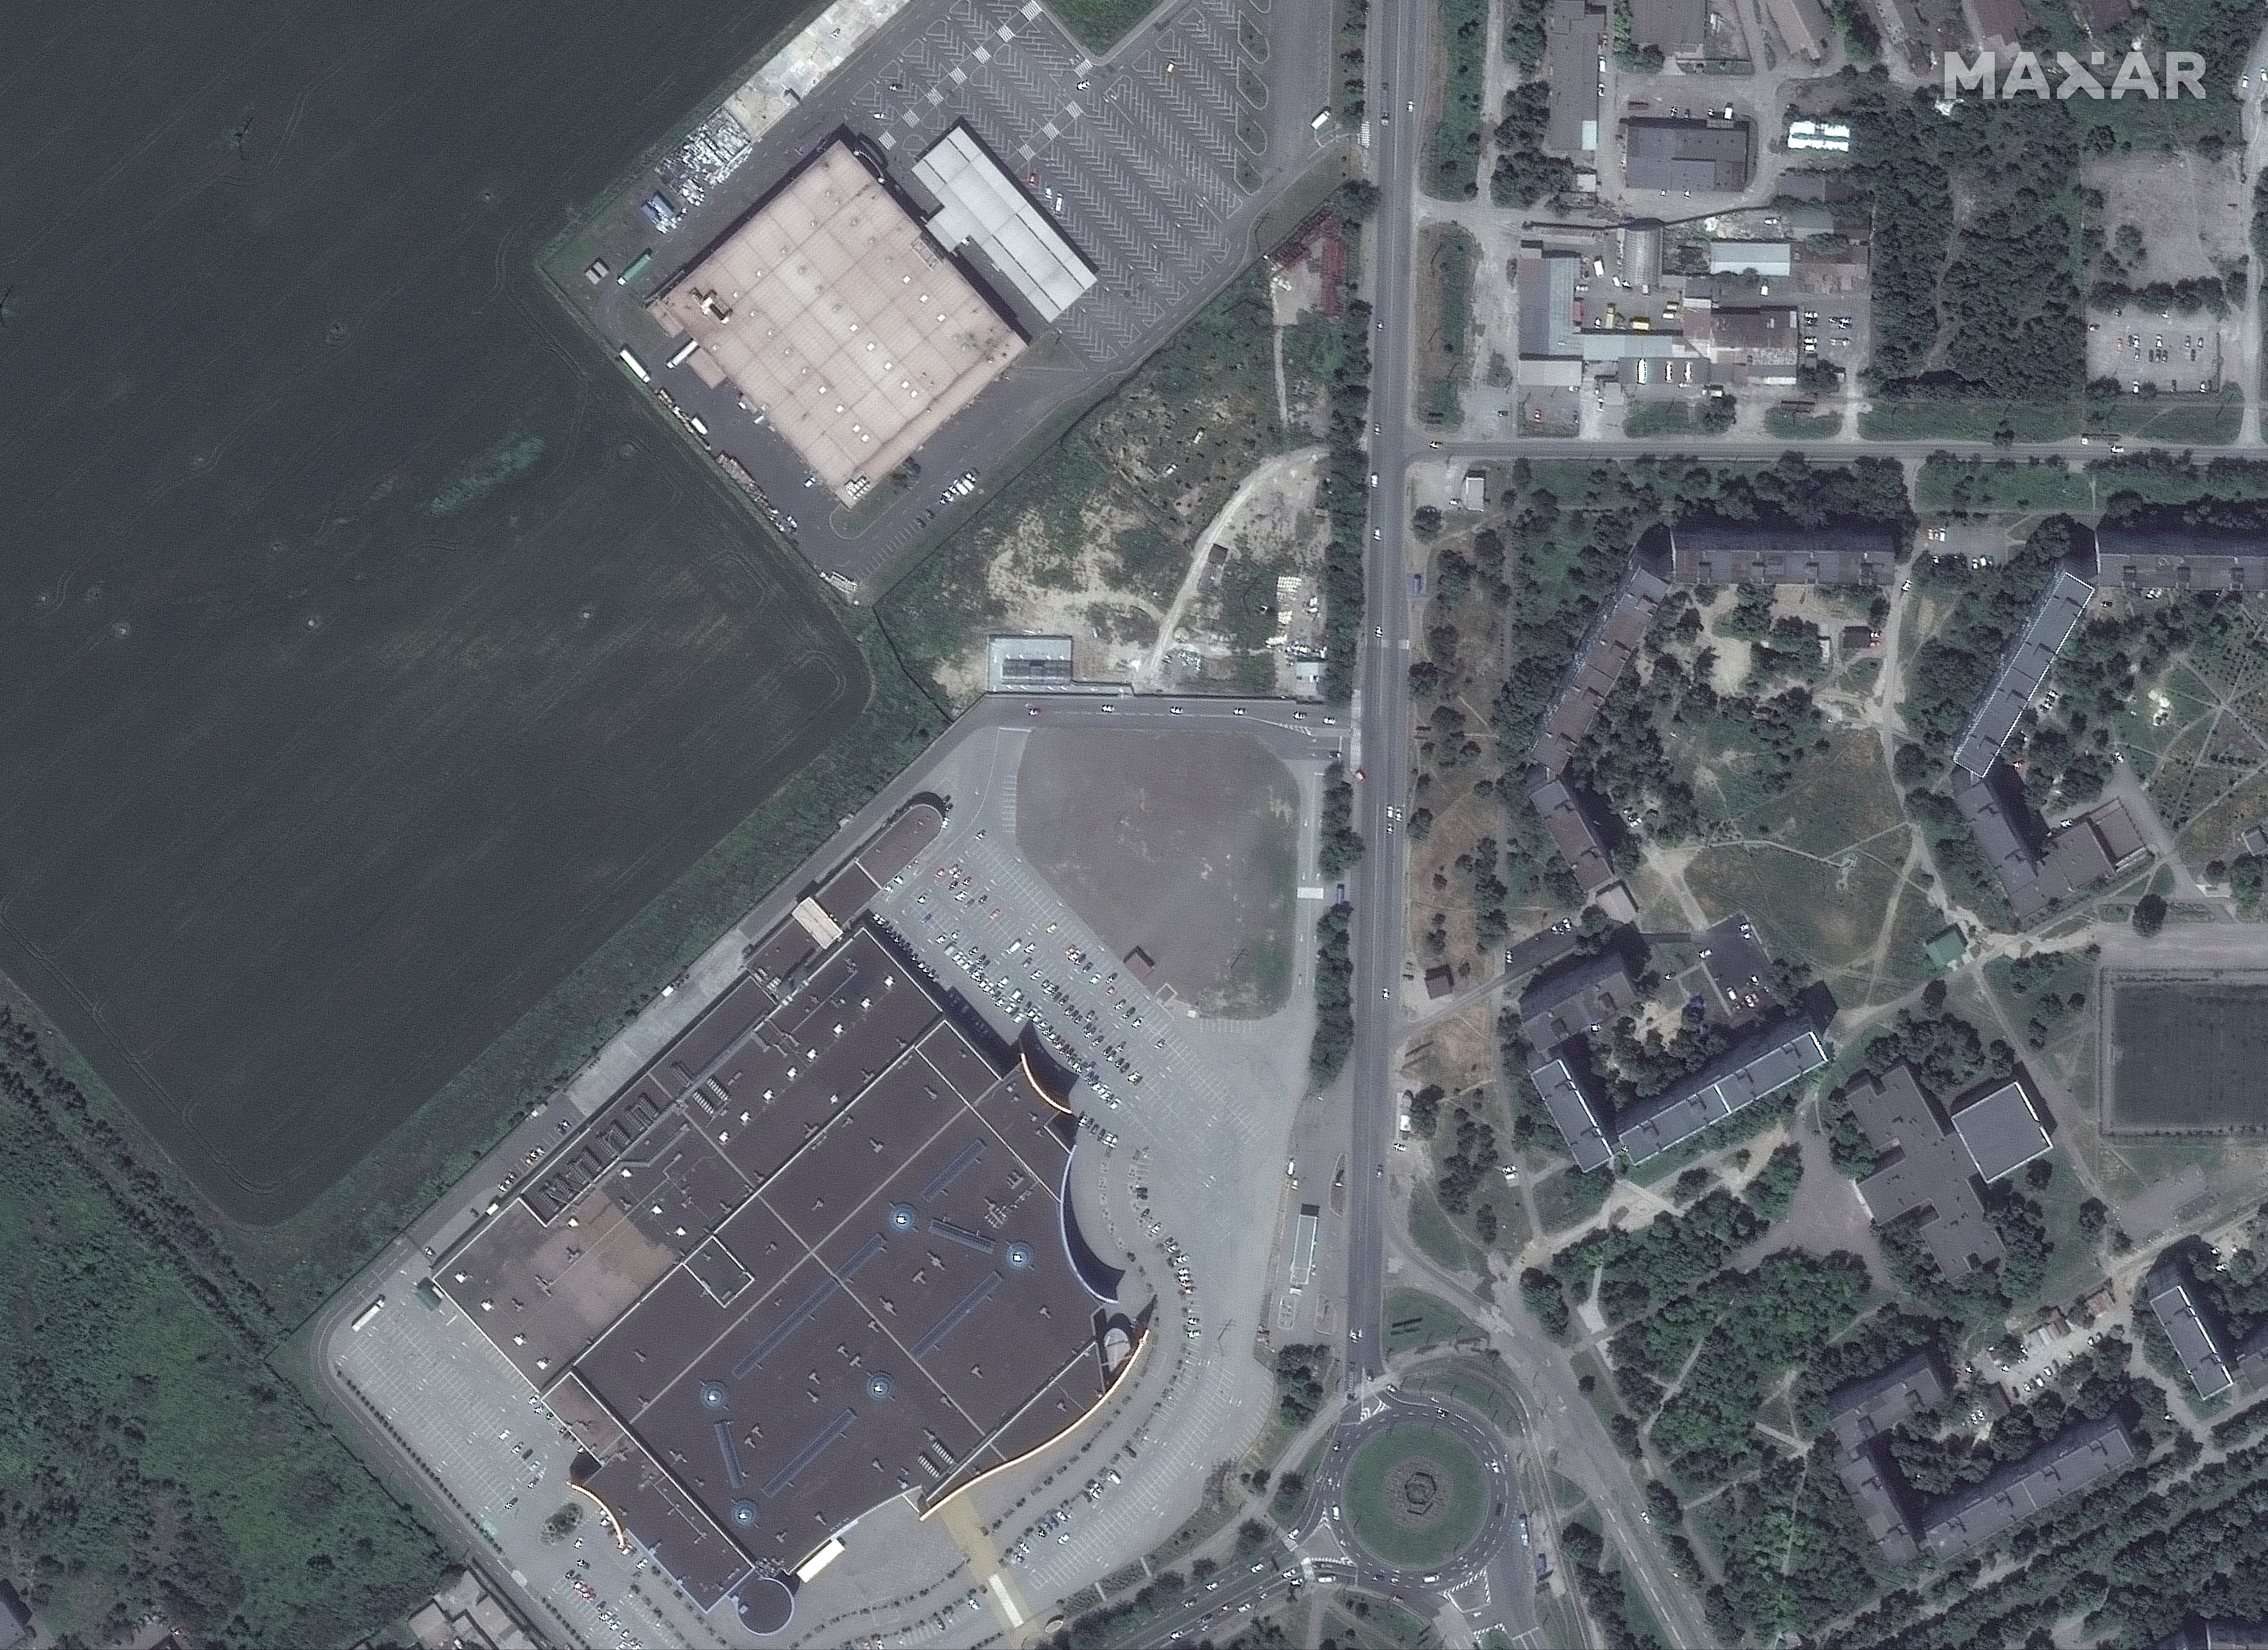 A satellite image shows grocery stores and shopping malls in Mariupol before Russia’s invasion of Ukraine